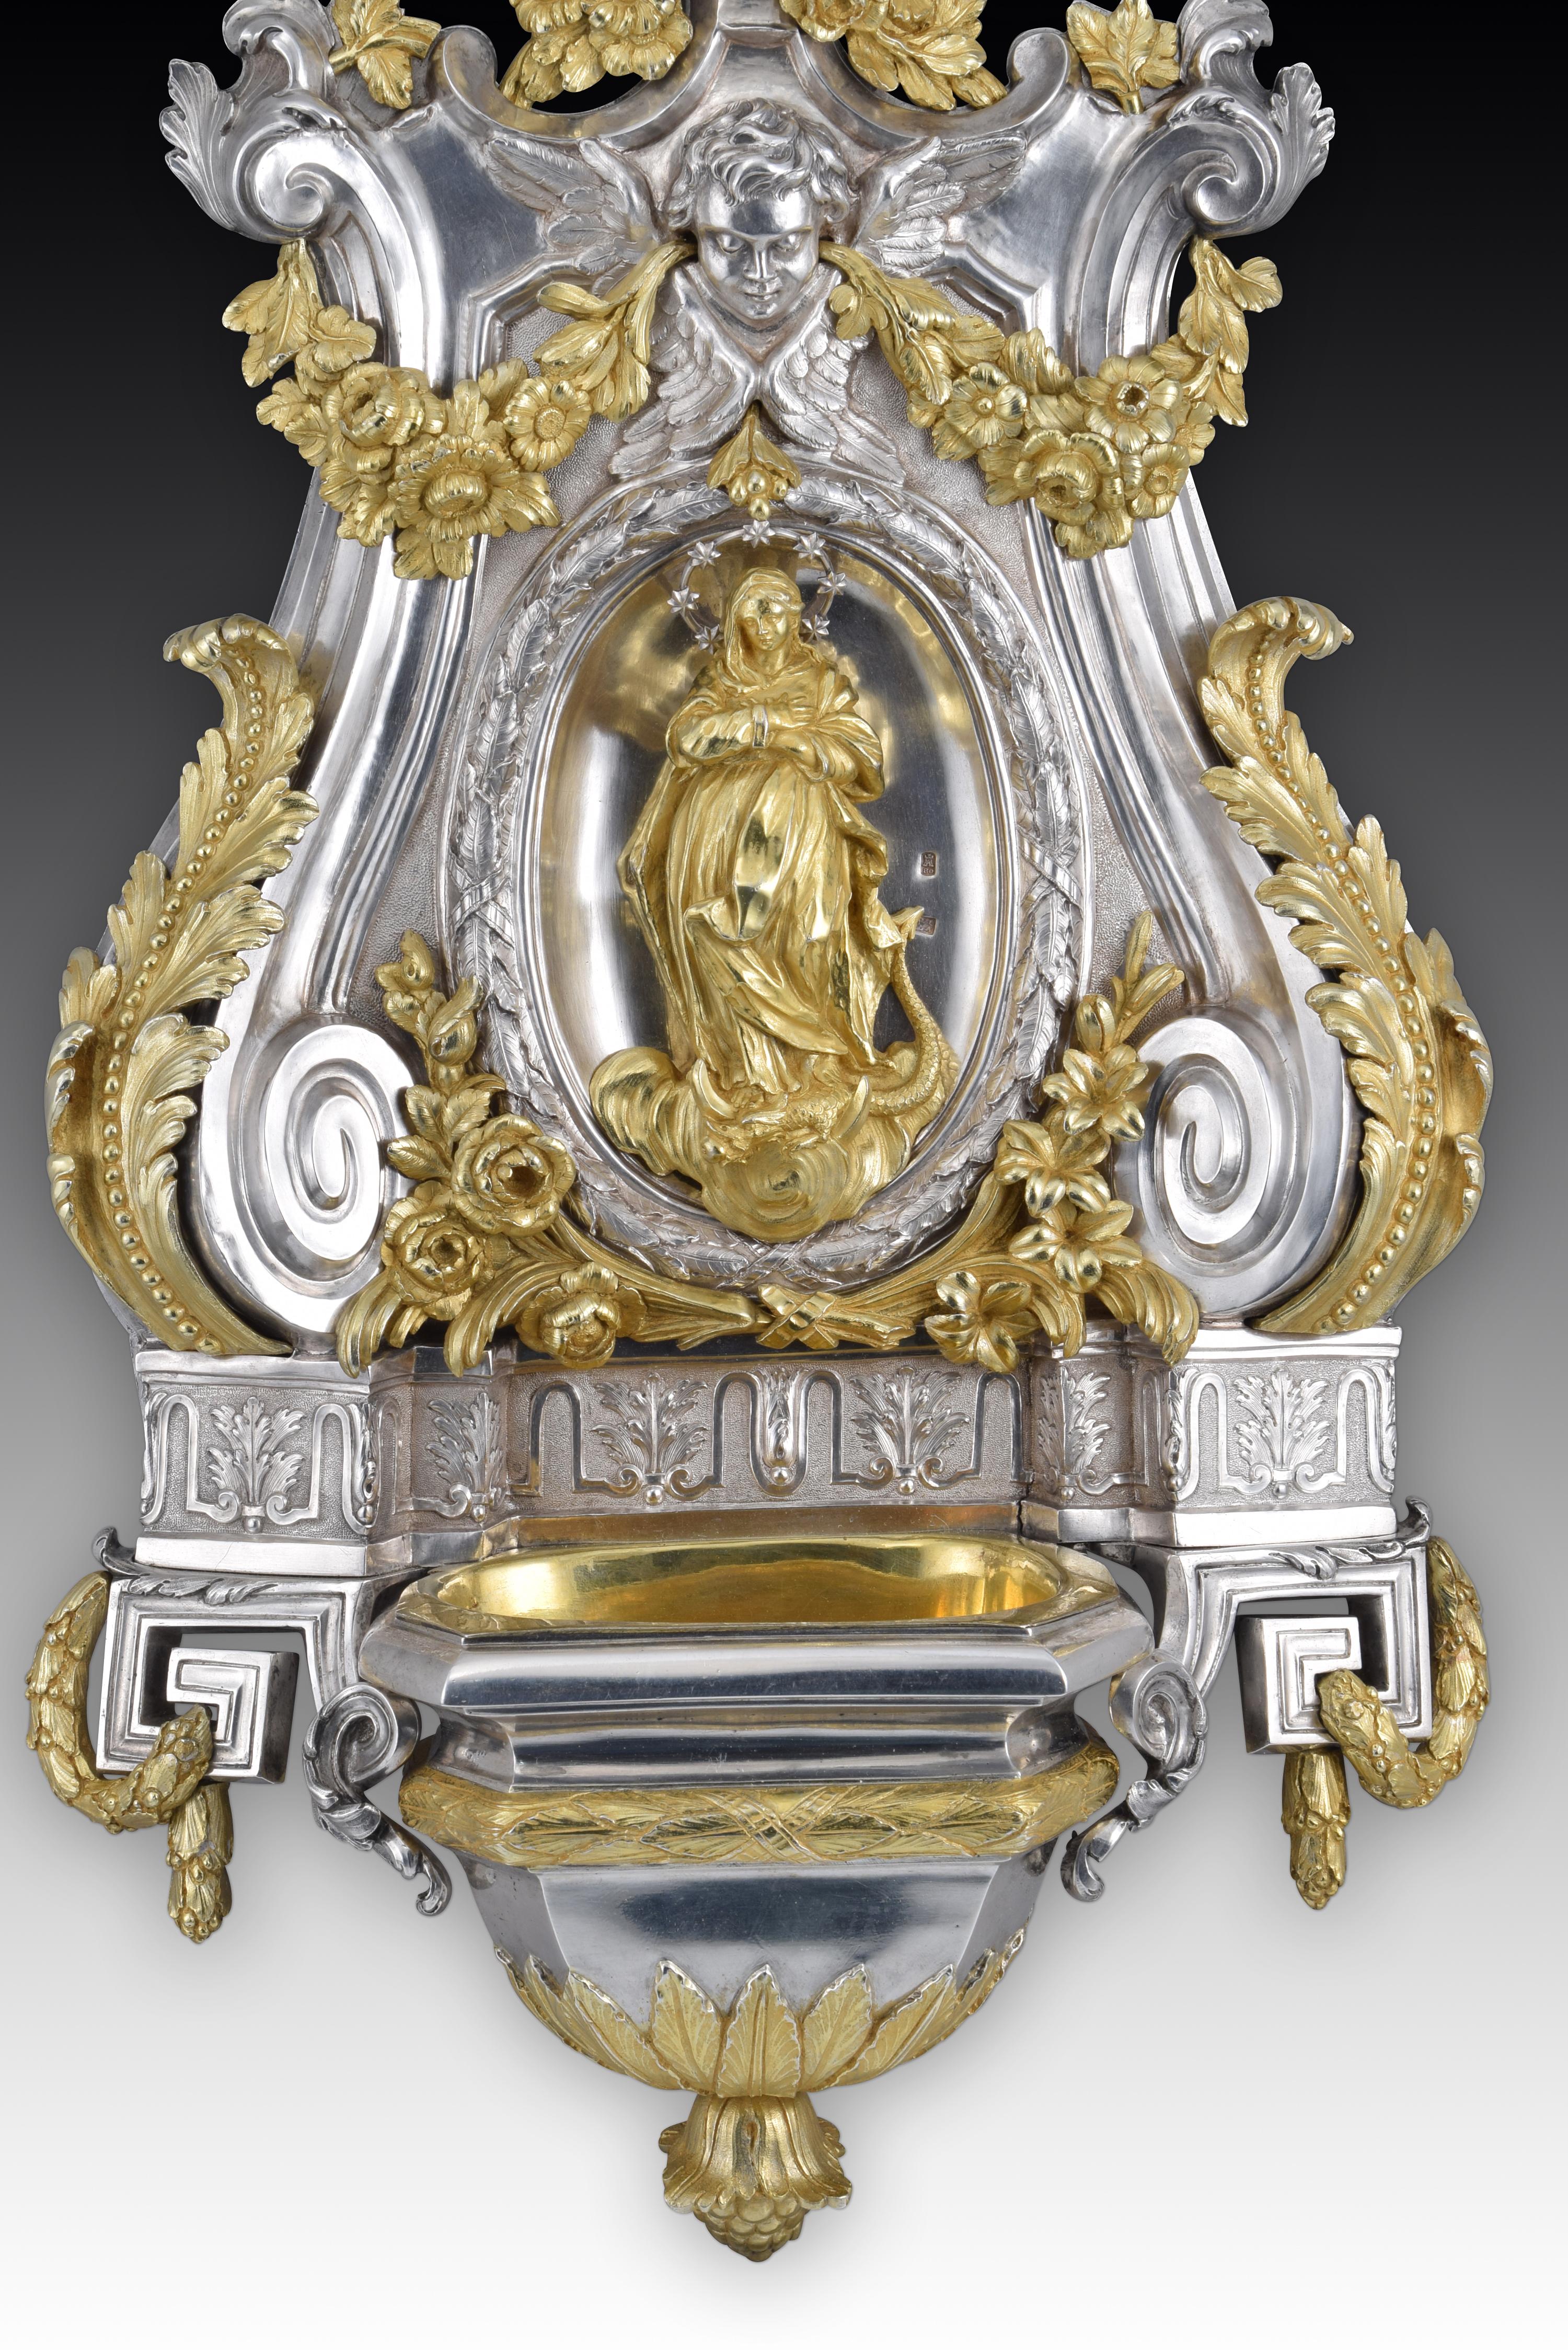 Neoclassical Silver Holy Water font or stoup. GUILLA. Madrid, 1780.